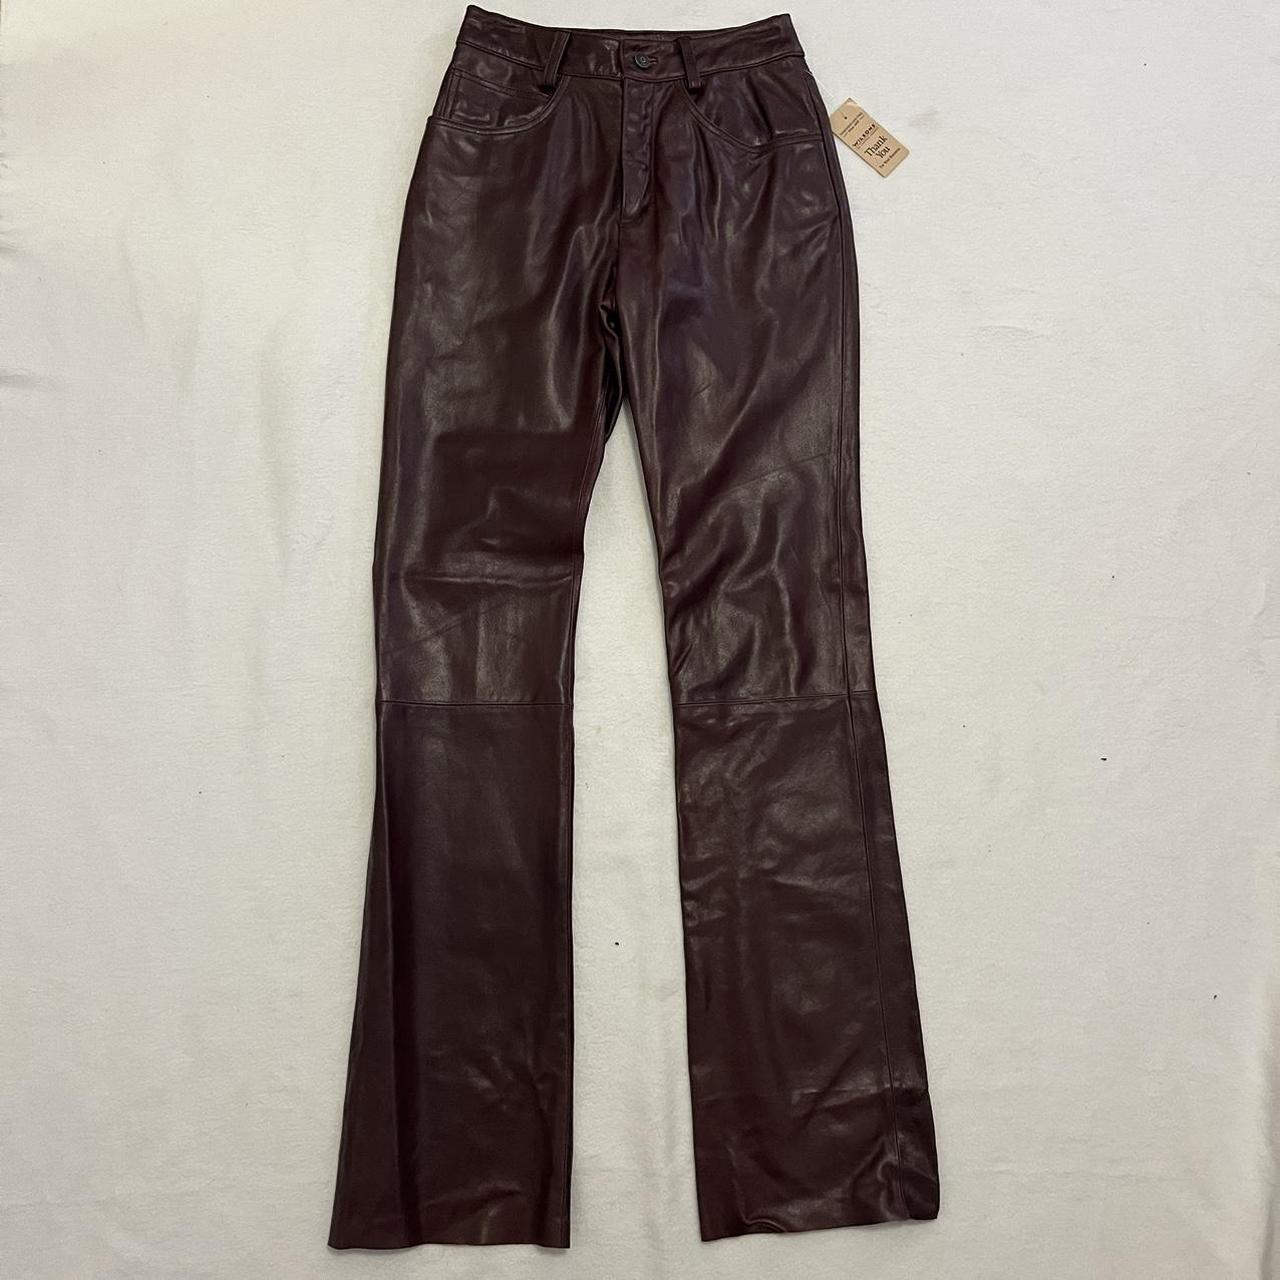 Wilson’s Leather Women's Brown and Burgundy Trousers